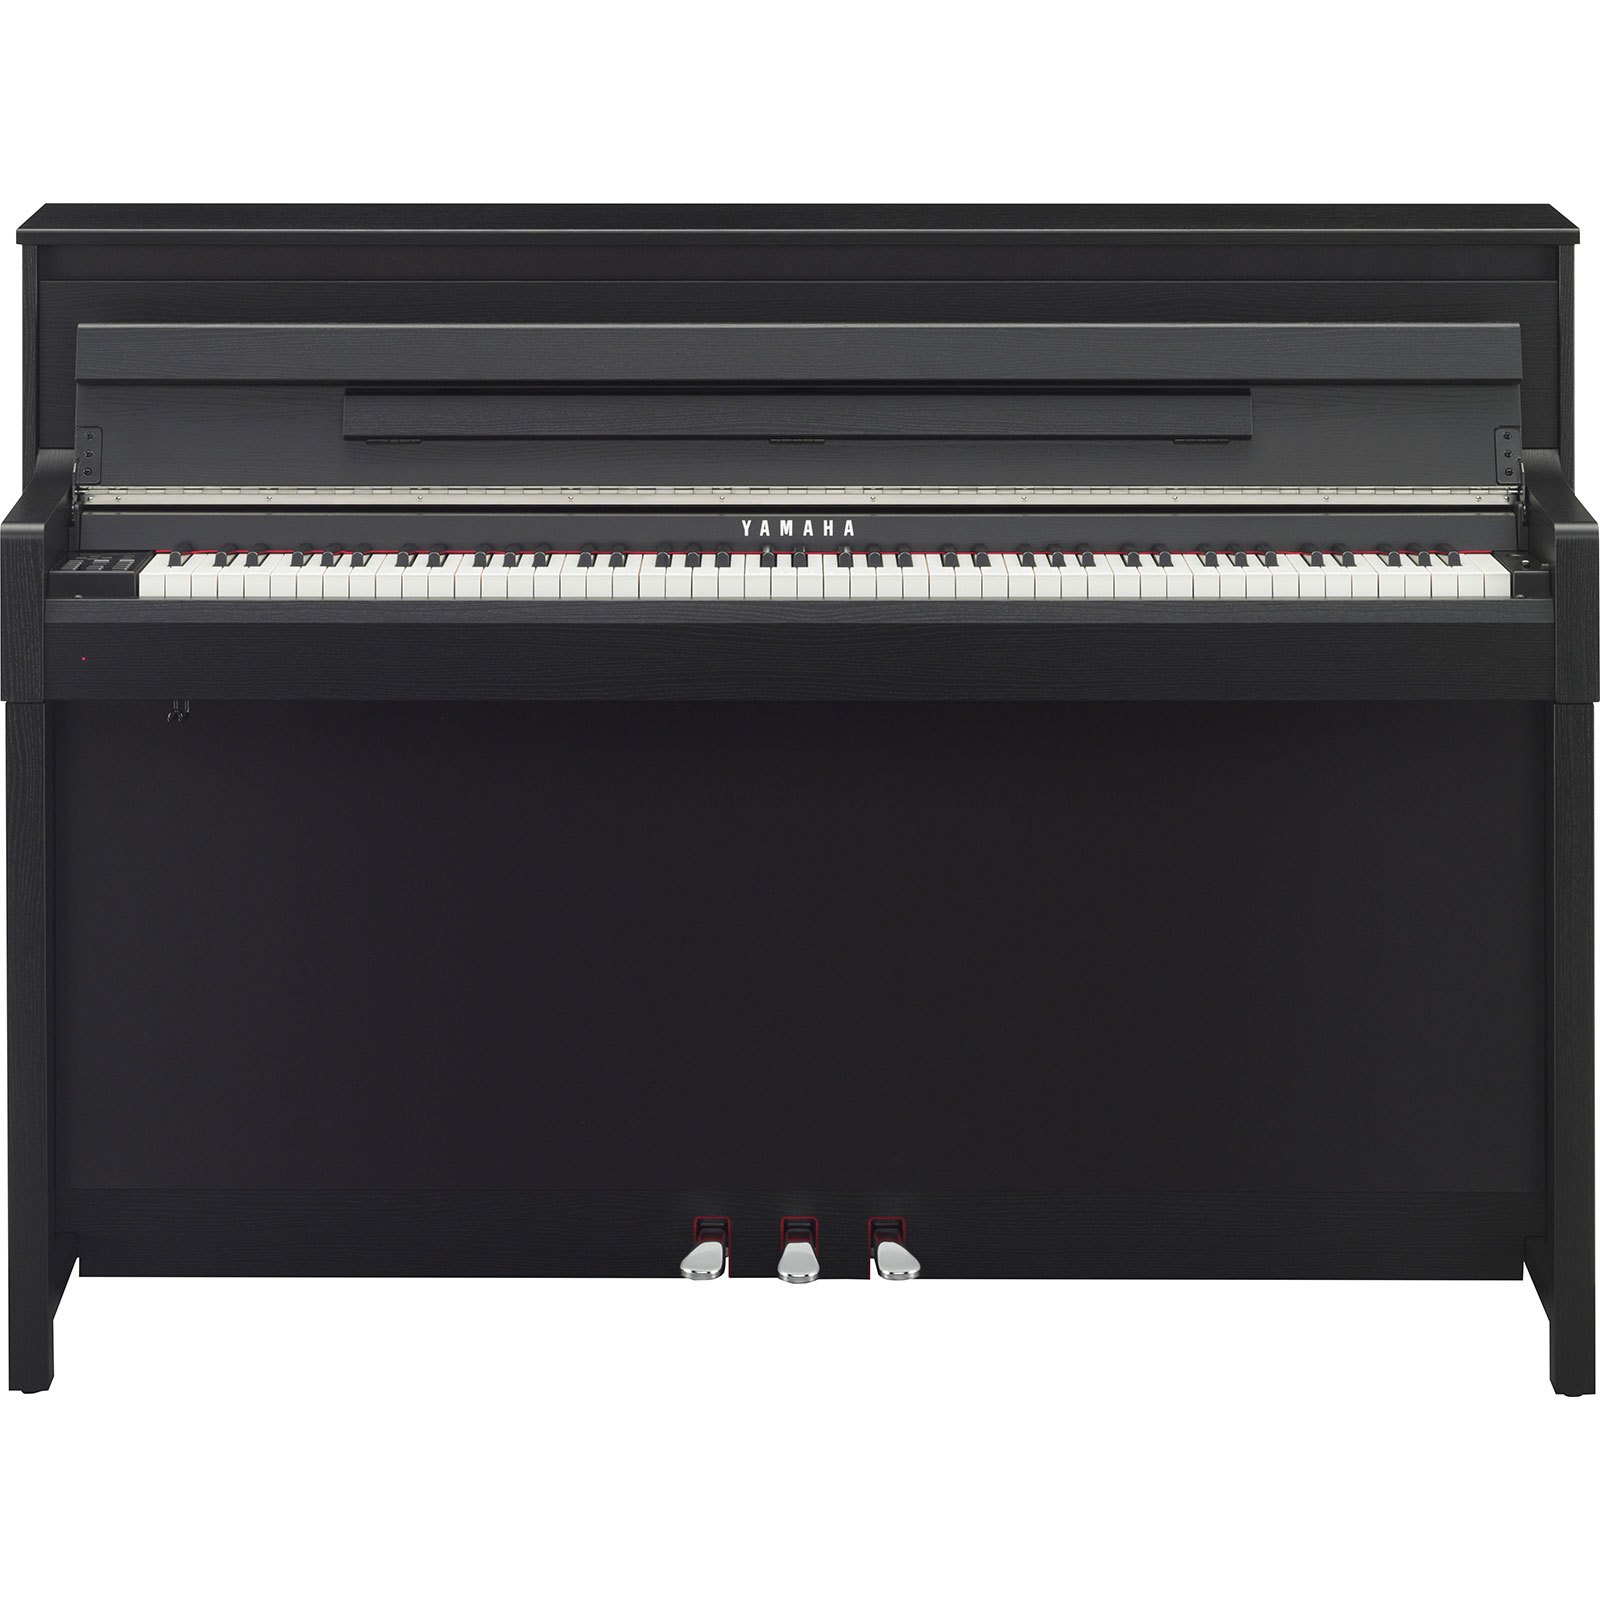 CLP-585 - Overview - Clavinova - Pianos - Musical Instruments - Products -  Yamaha - United States